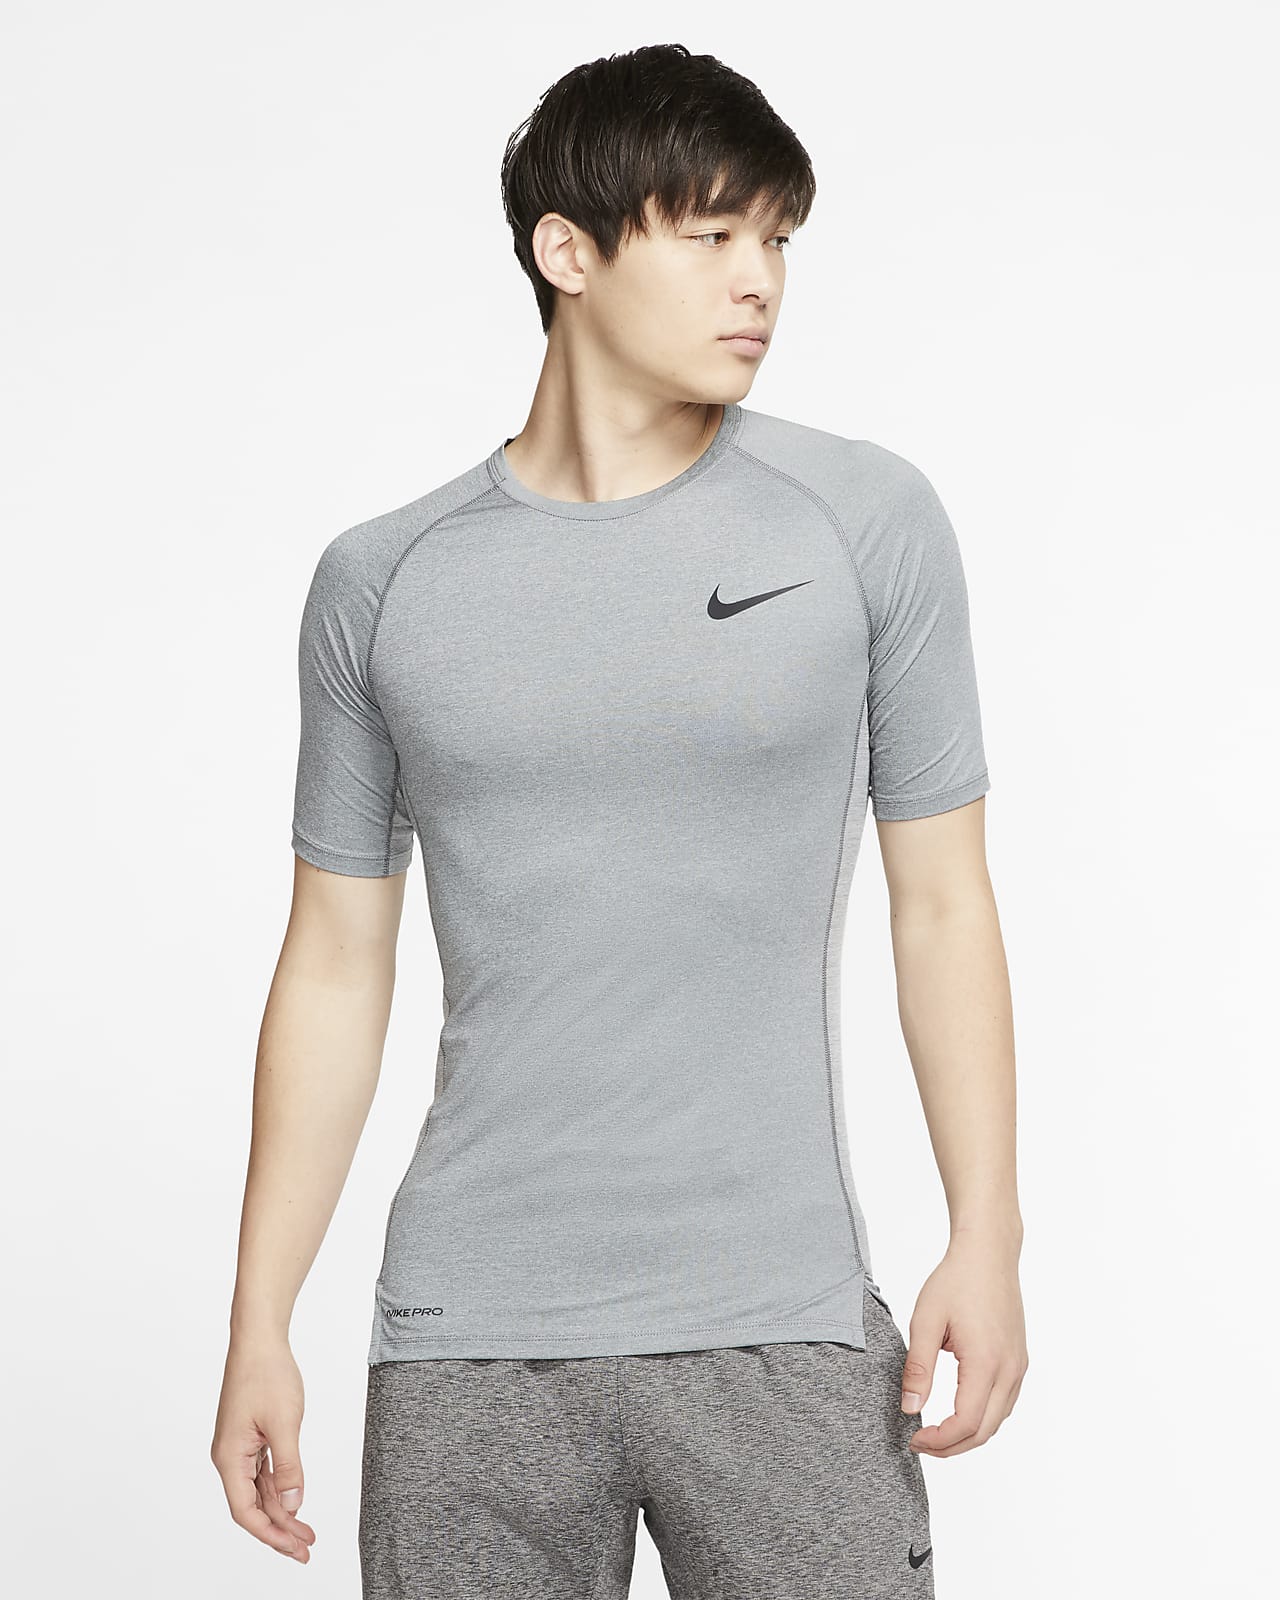 nike pro tight fit top